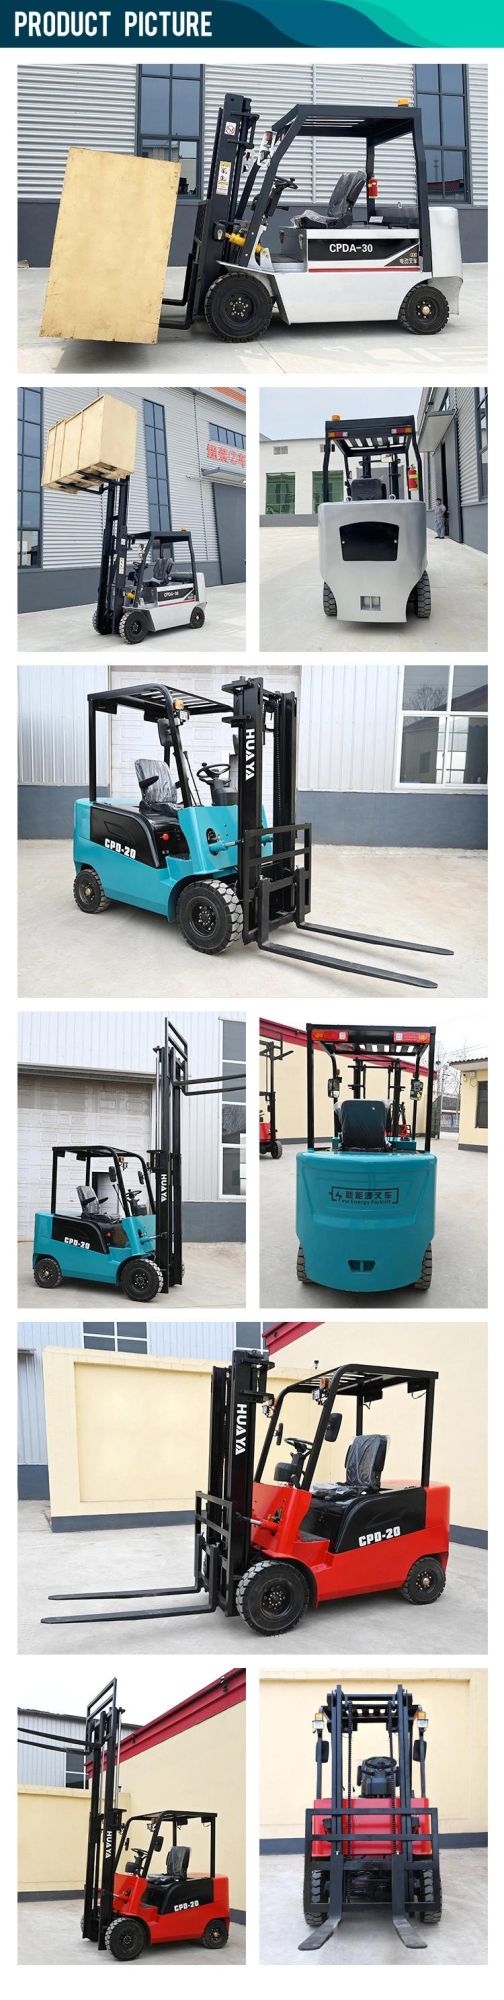 New Huaya China with Attachment 2 Ton Electric Forklift Truck